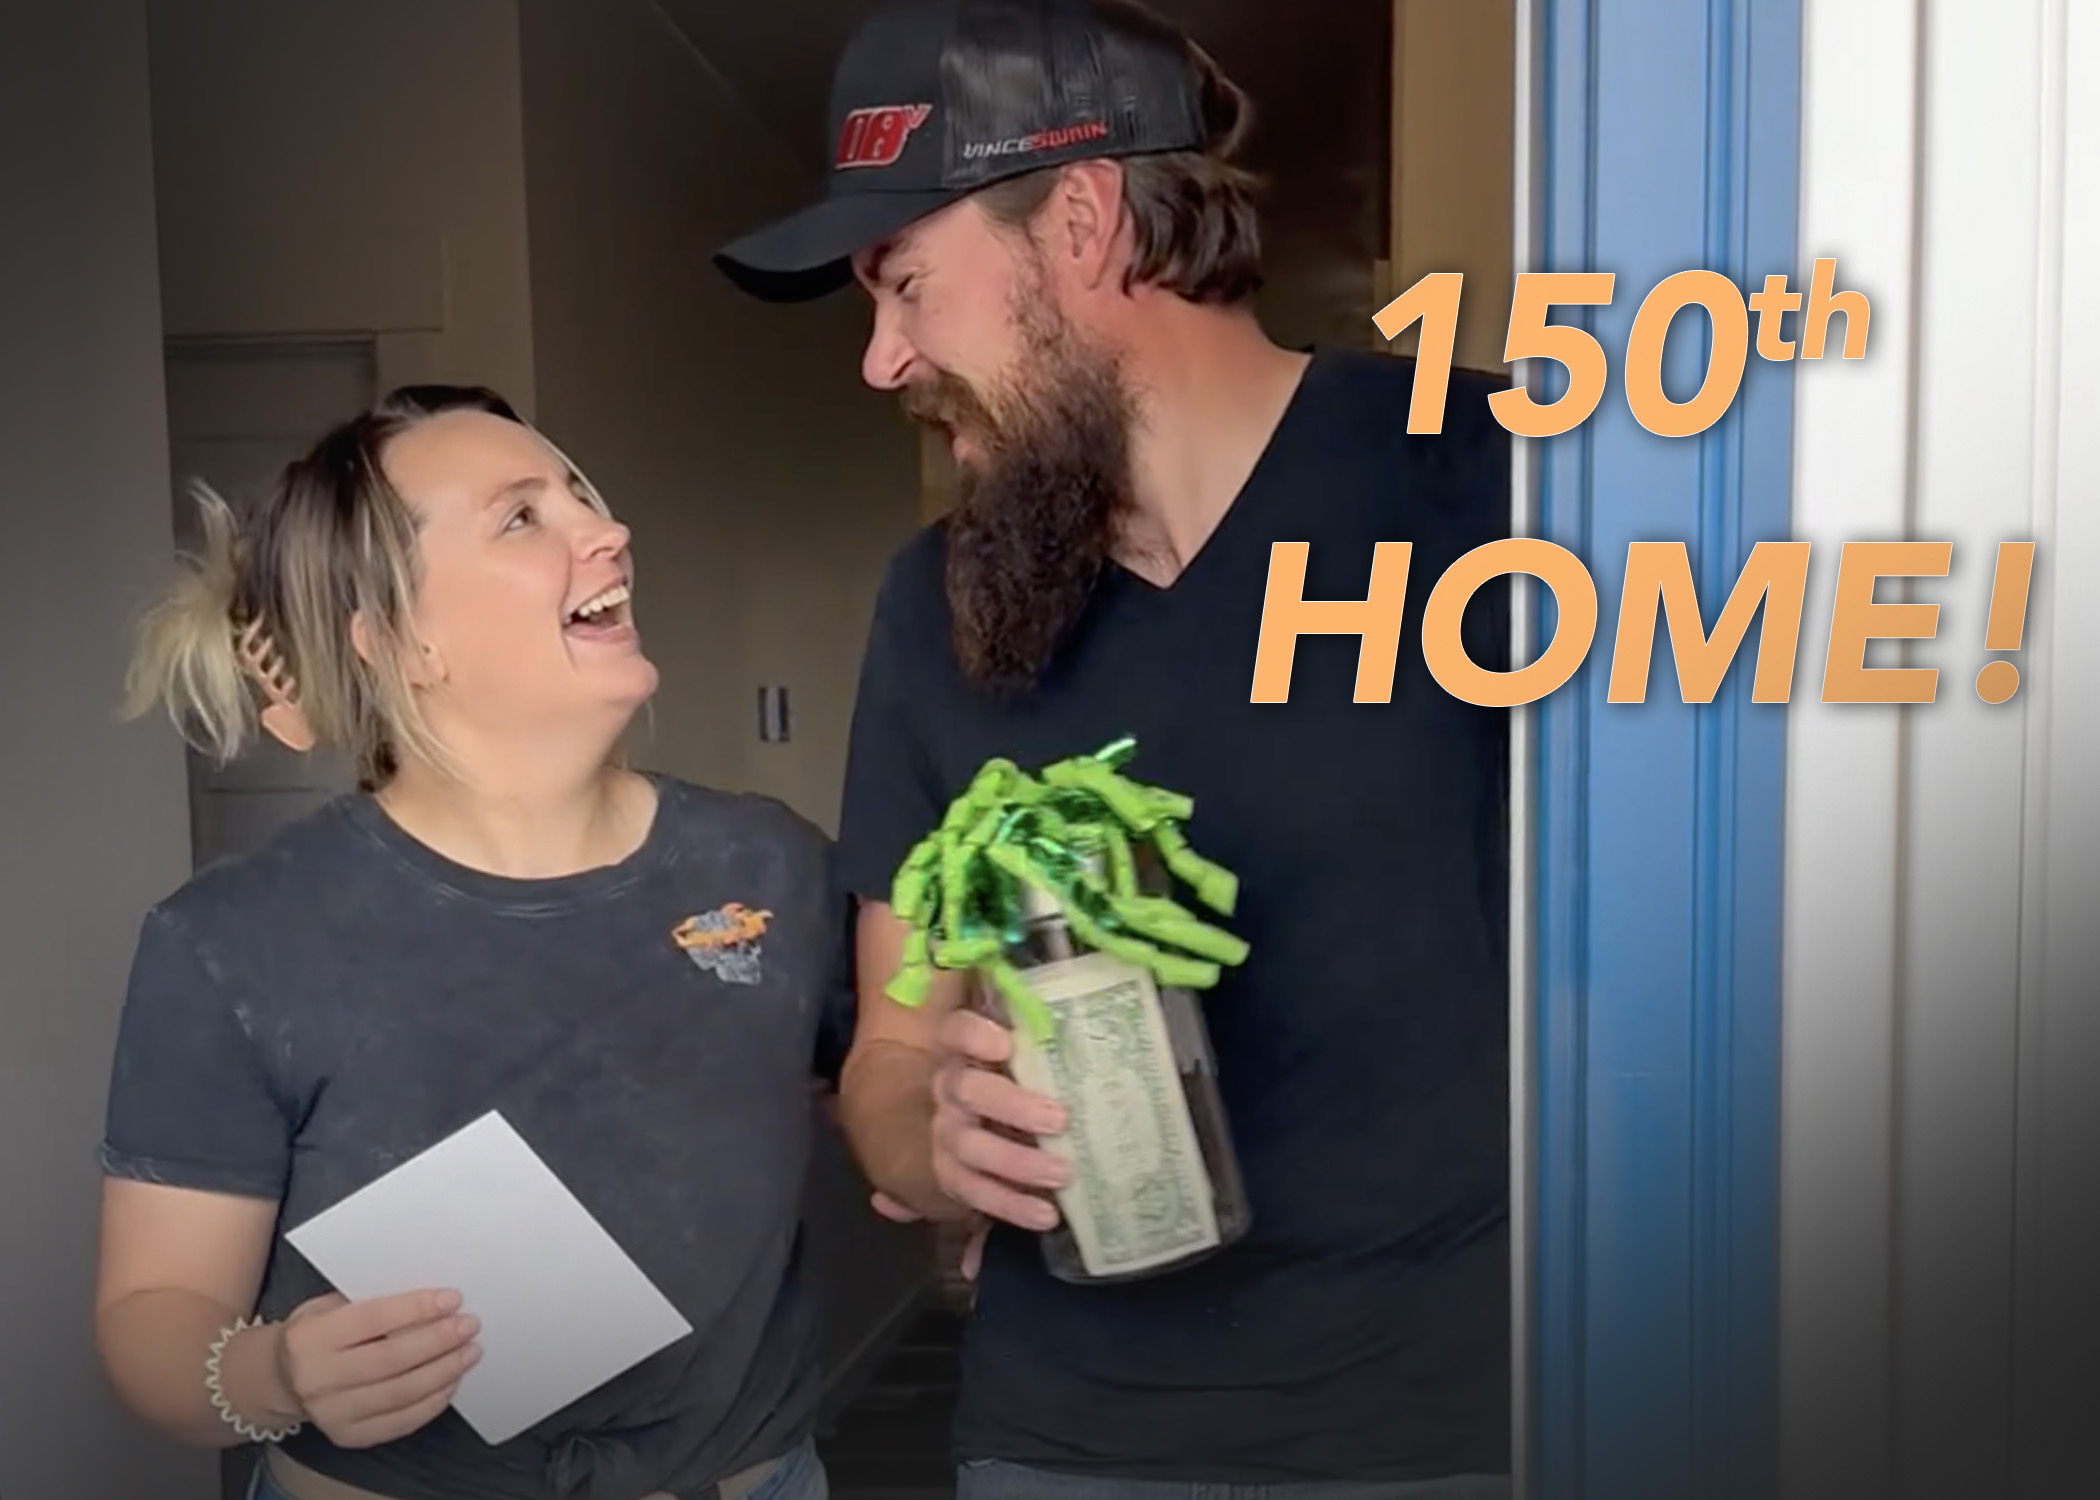 excited homeowners smile at each other when they receive $150 cash